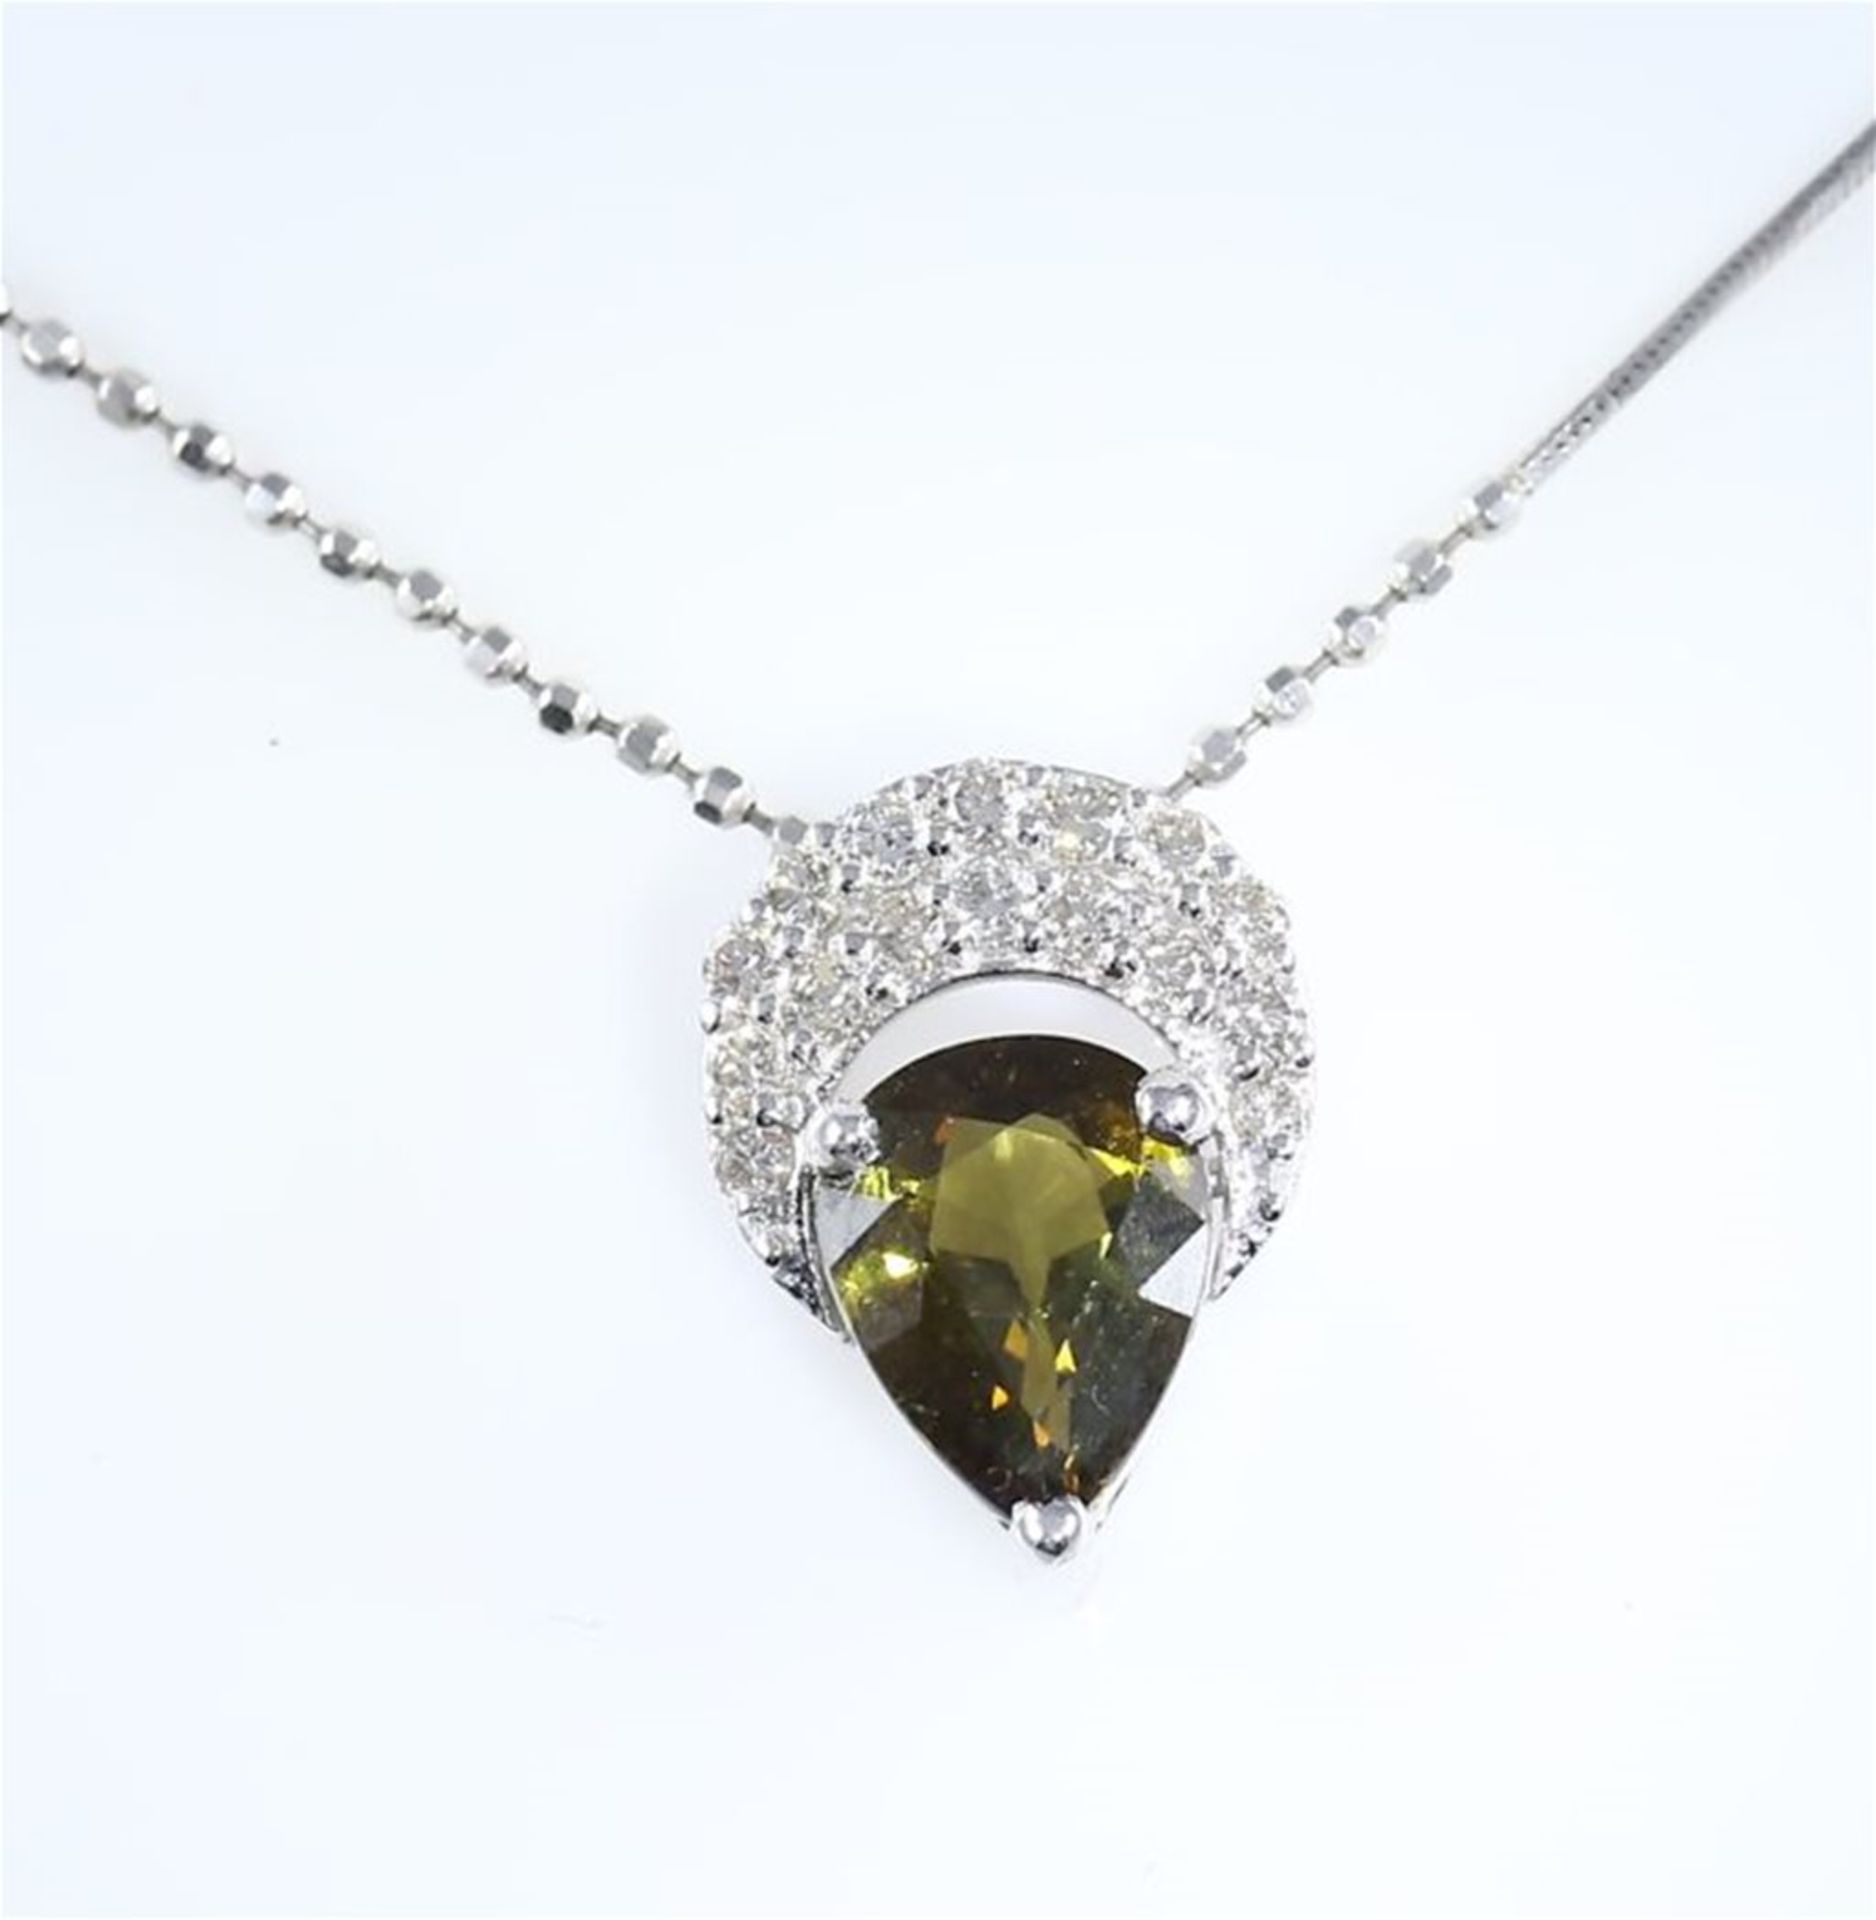 IGI certified 14 K Very Exclusive White Gold Alexandrite and Diamond Pendant Necklace - Image 3 of 10